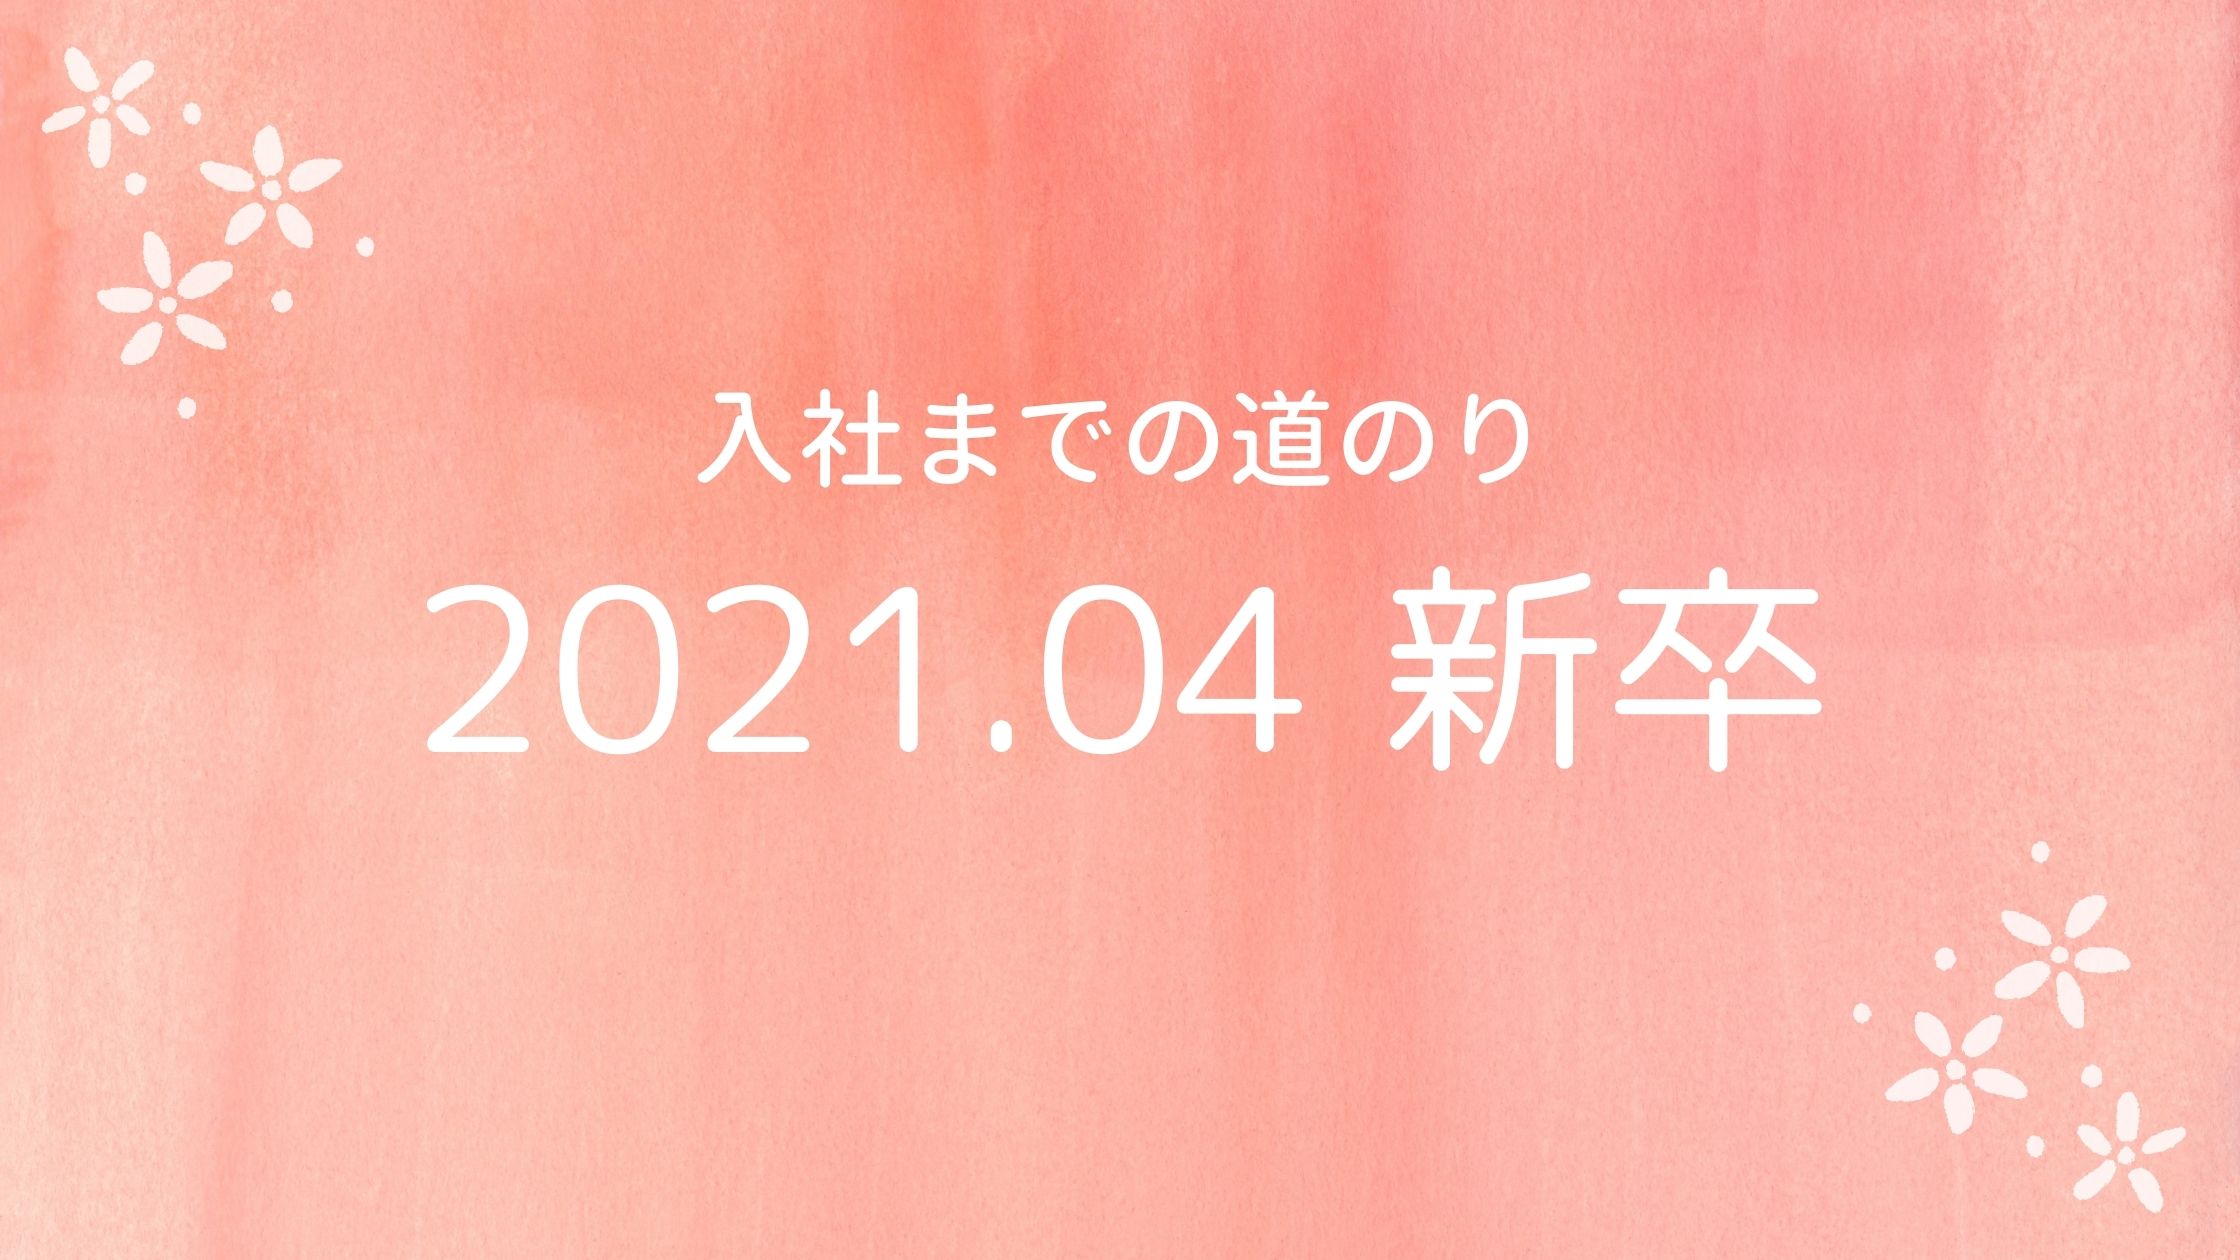 You are currently viewing 2021.04新卒入社 入社までの道のり